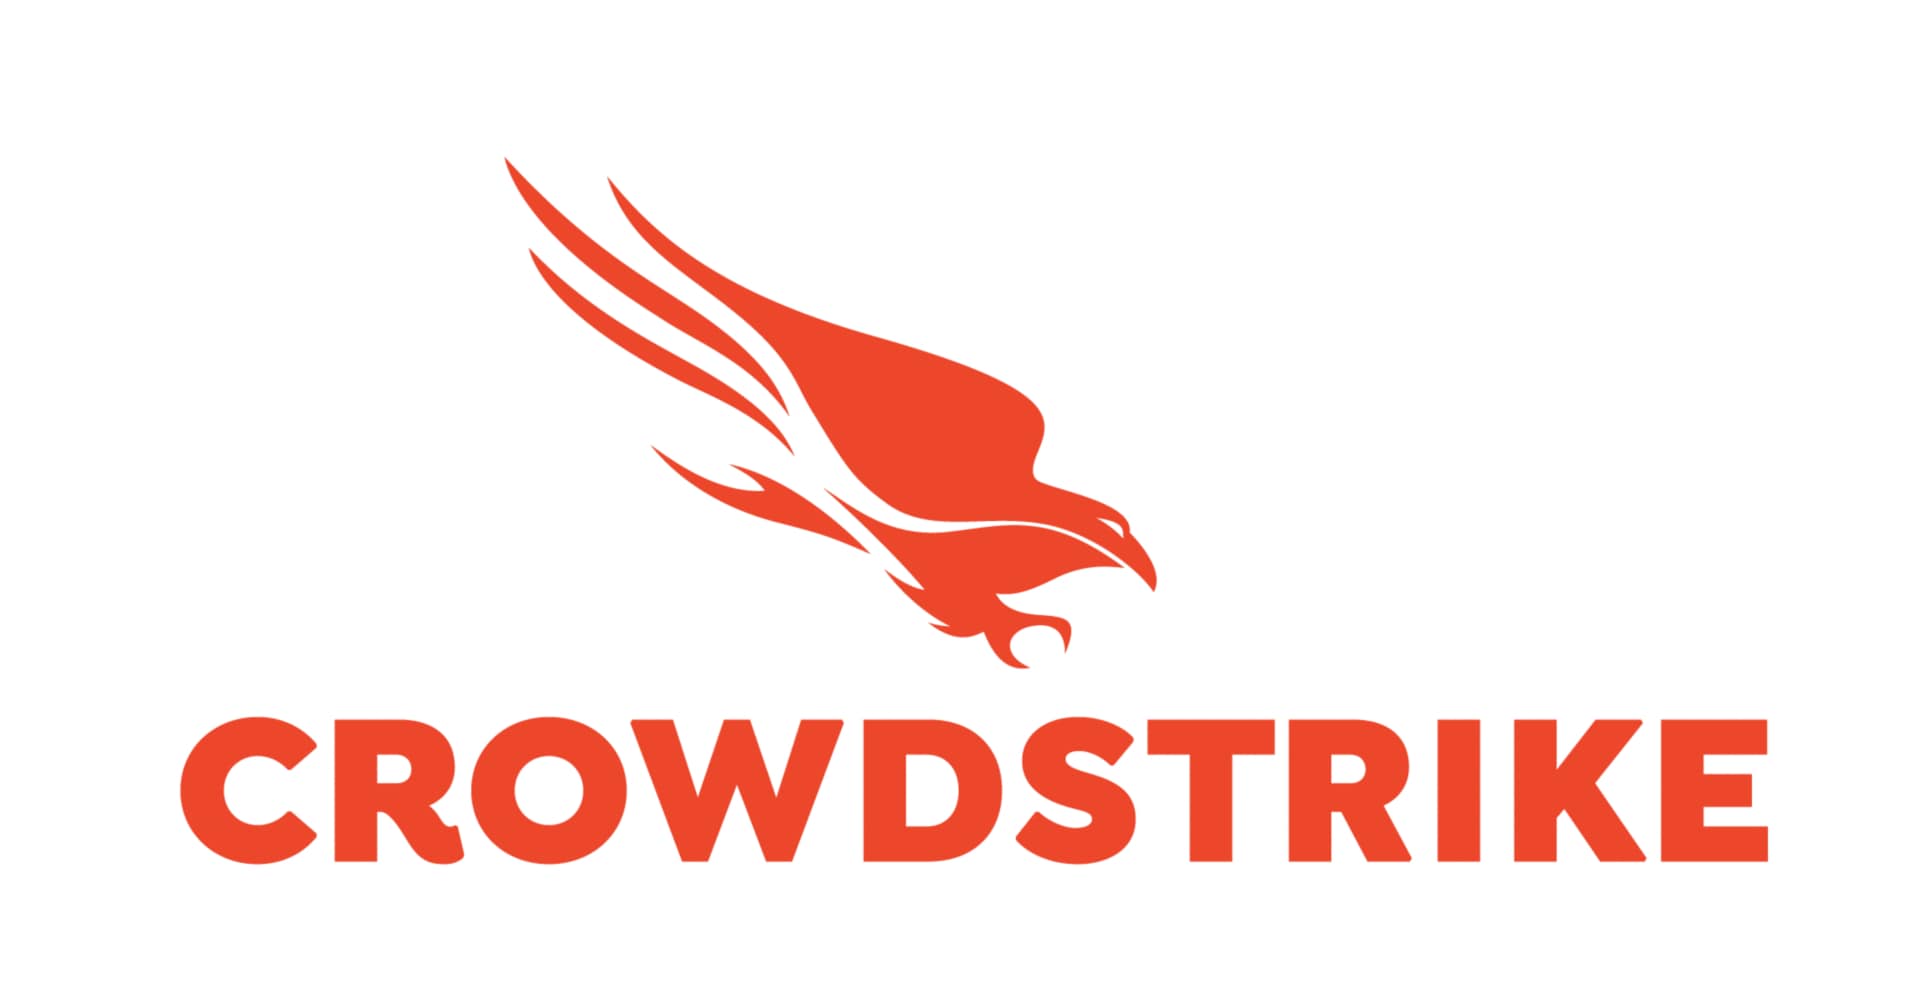 CrowdStrike 7-Month Falcon Device Control Software Subscription (150-299 Licenses)